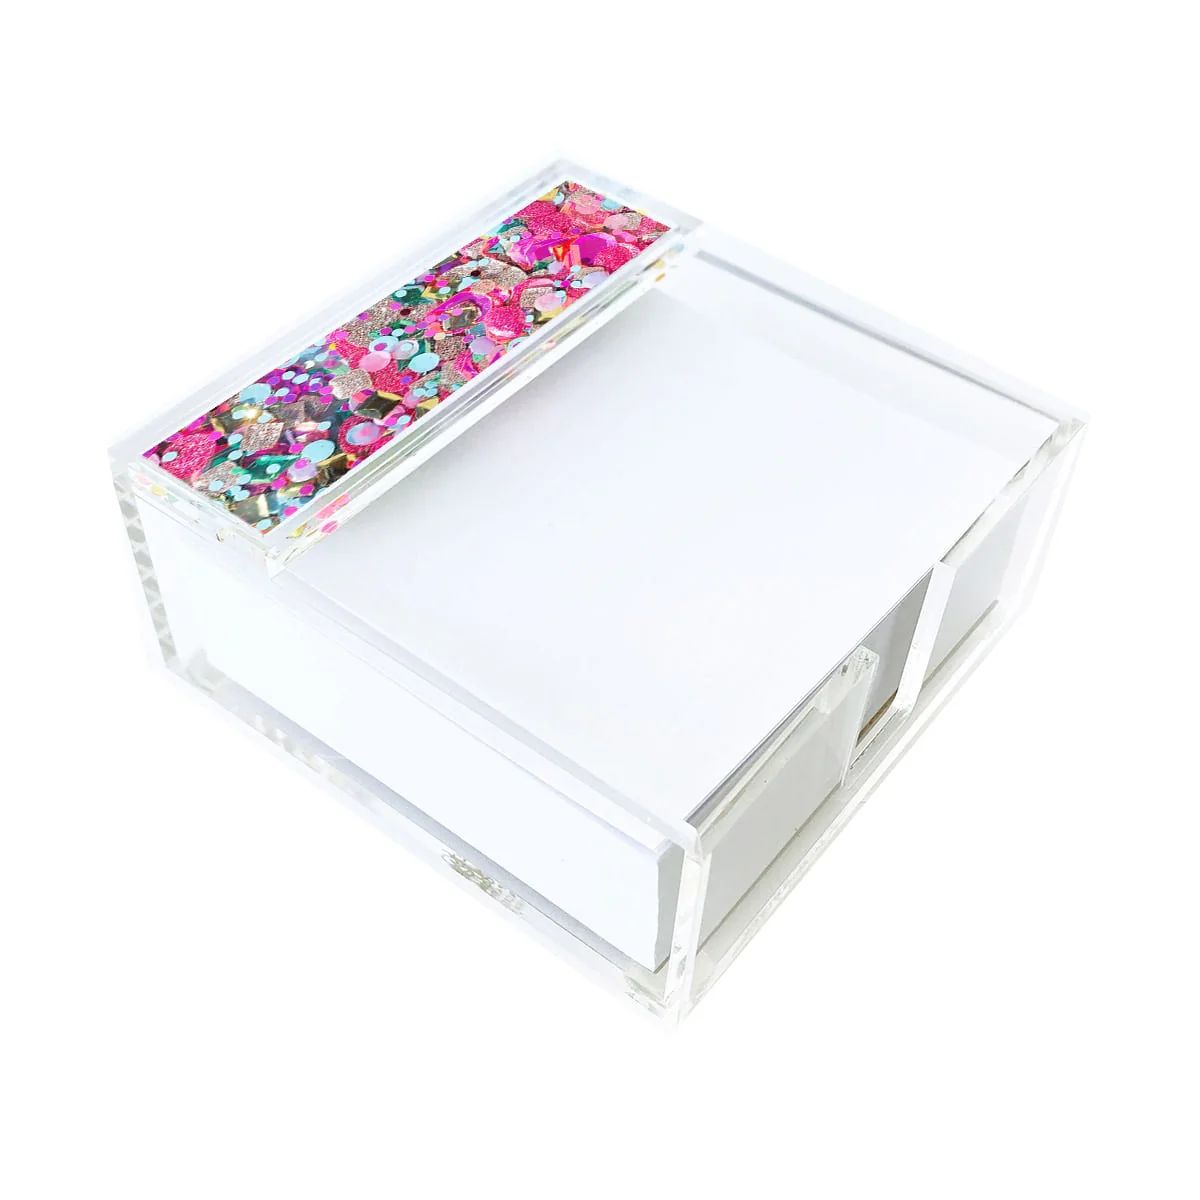 Be A Gem Confetti Notepad Holder | Packed Party